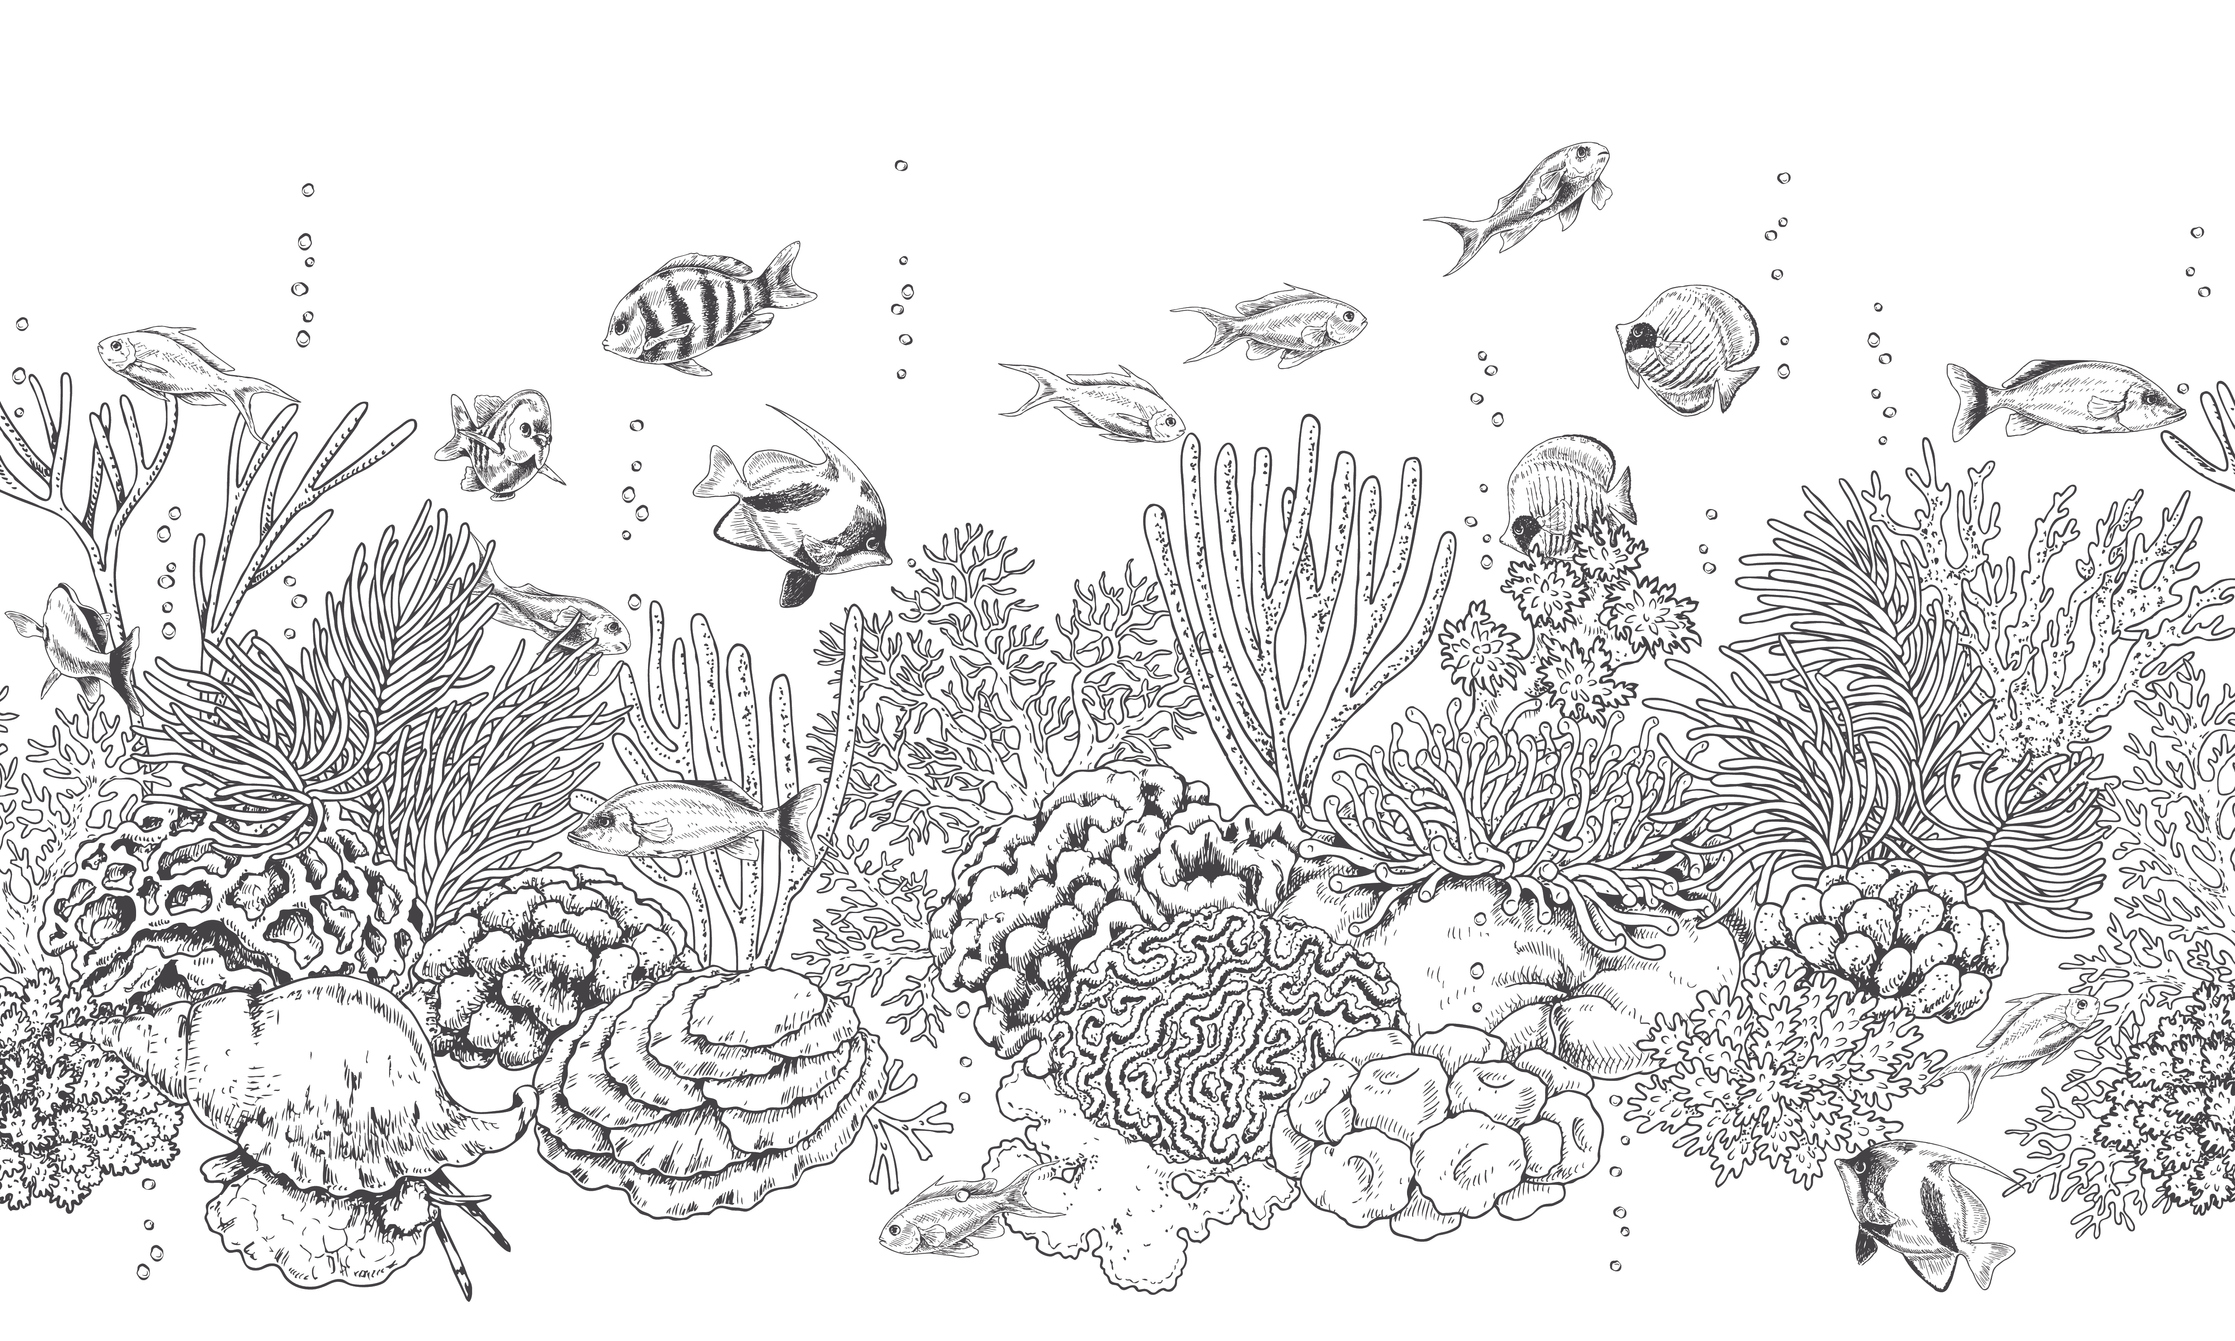 Hand drawn underwater natural elements. Seamless line horizontal pattern with reef corals, actinia, clams and swimming fishes. Monochrome sea bottom texture. Black and white illustration.